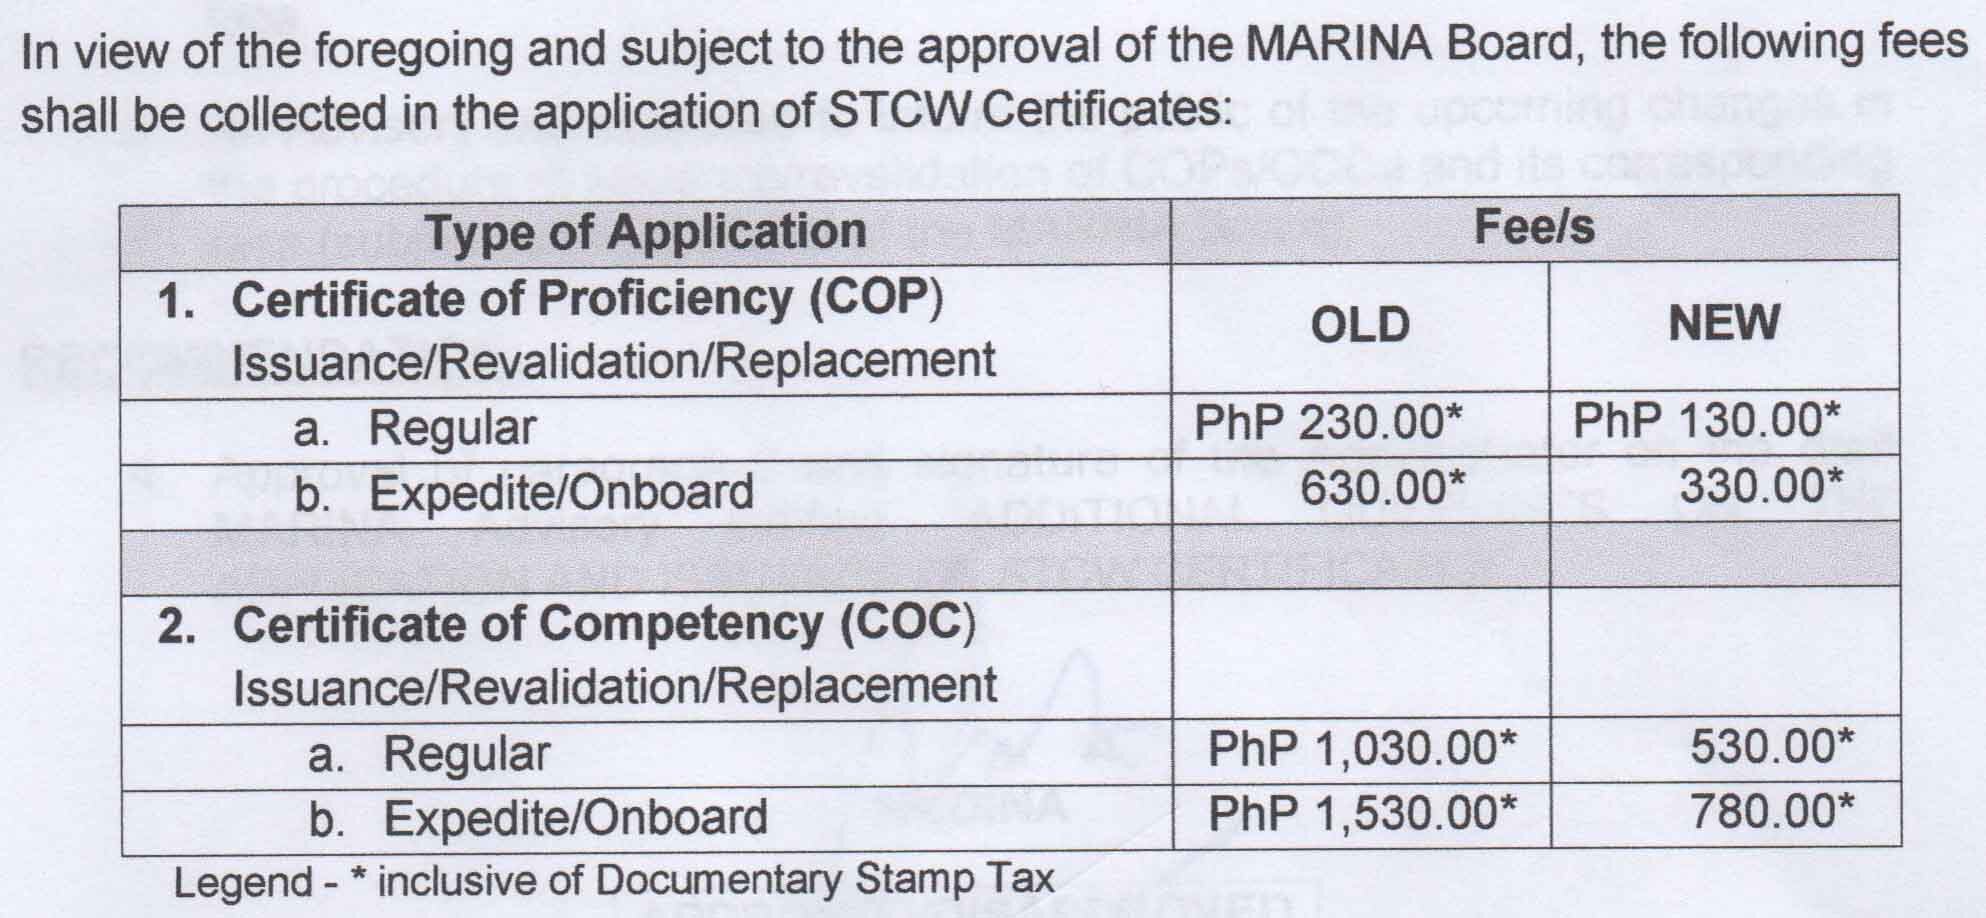 Comparing the old and new fees for COP and COC applications.